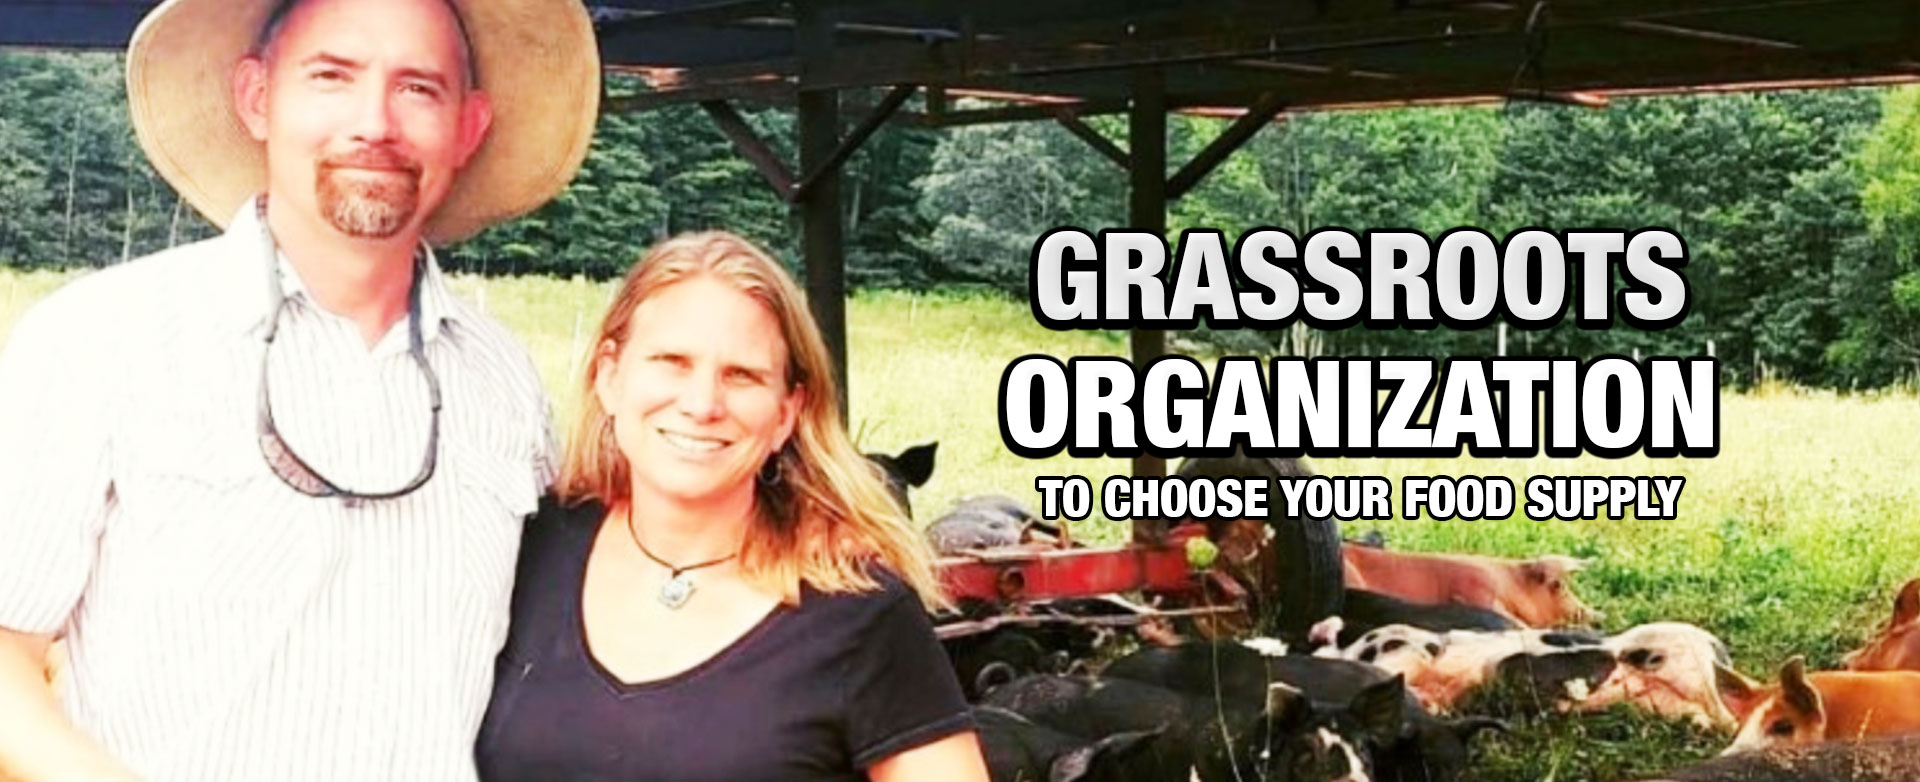 MyPatriotsNetwork-Grassroots Organization Defends Your Right To Choose Your Food Supply